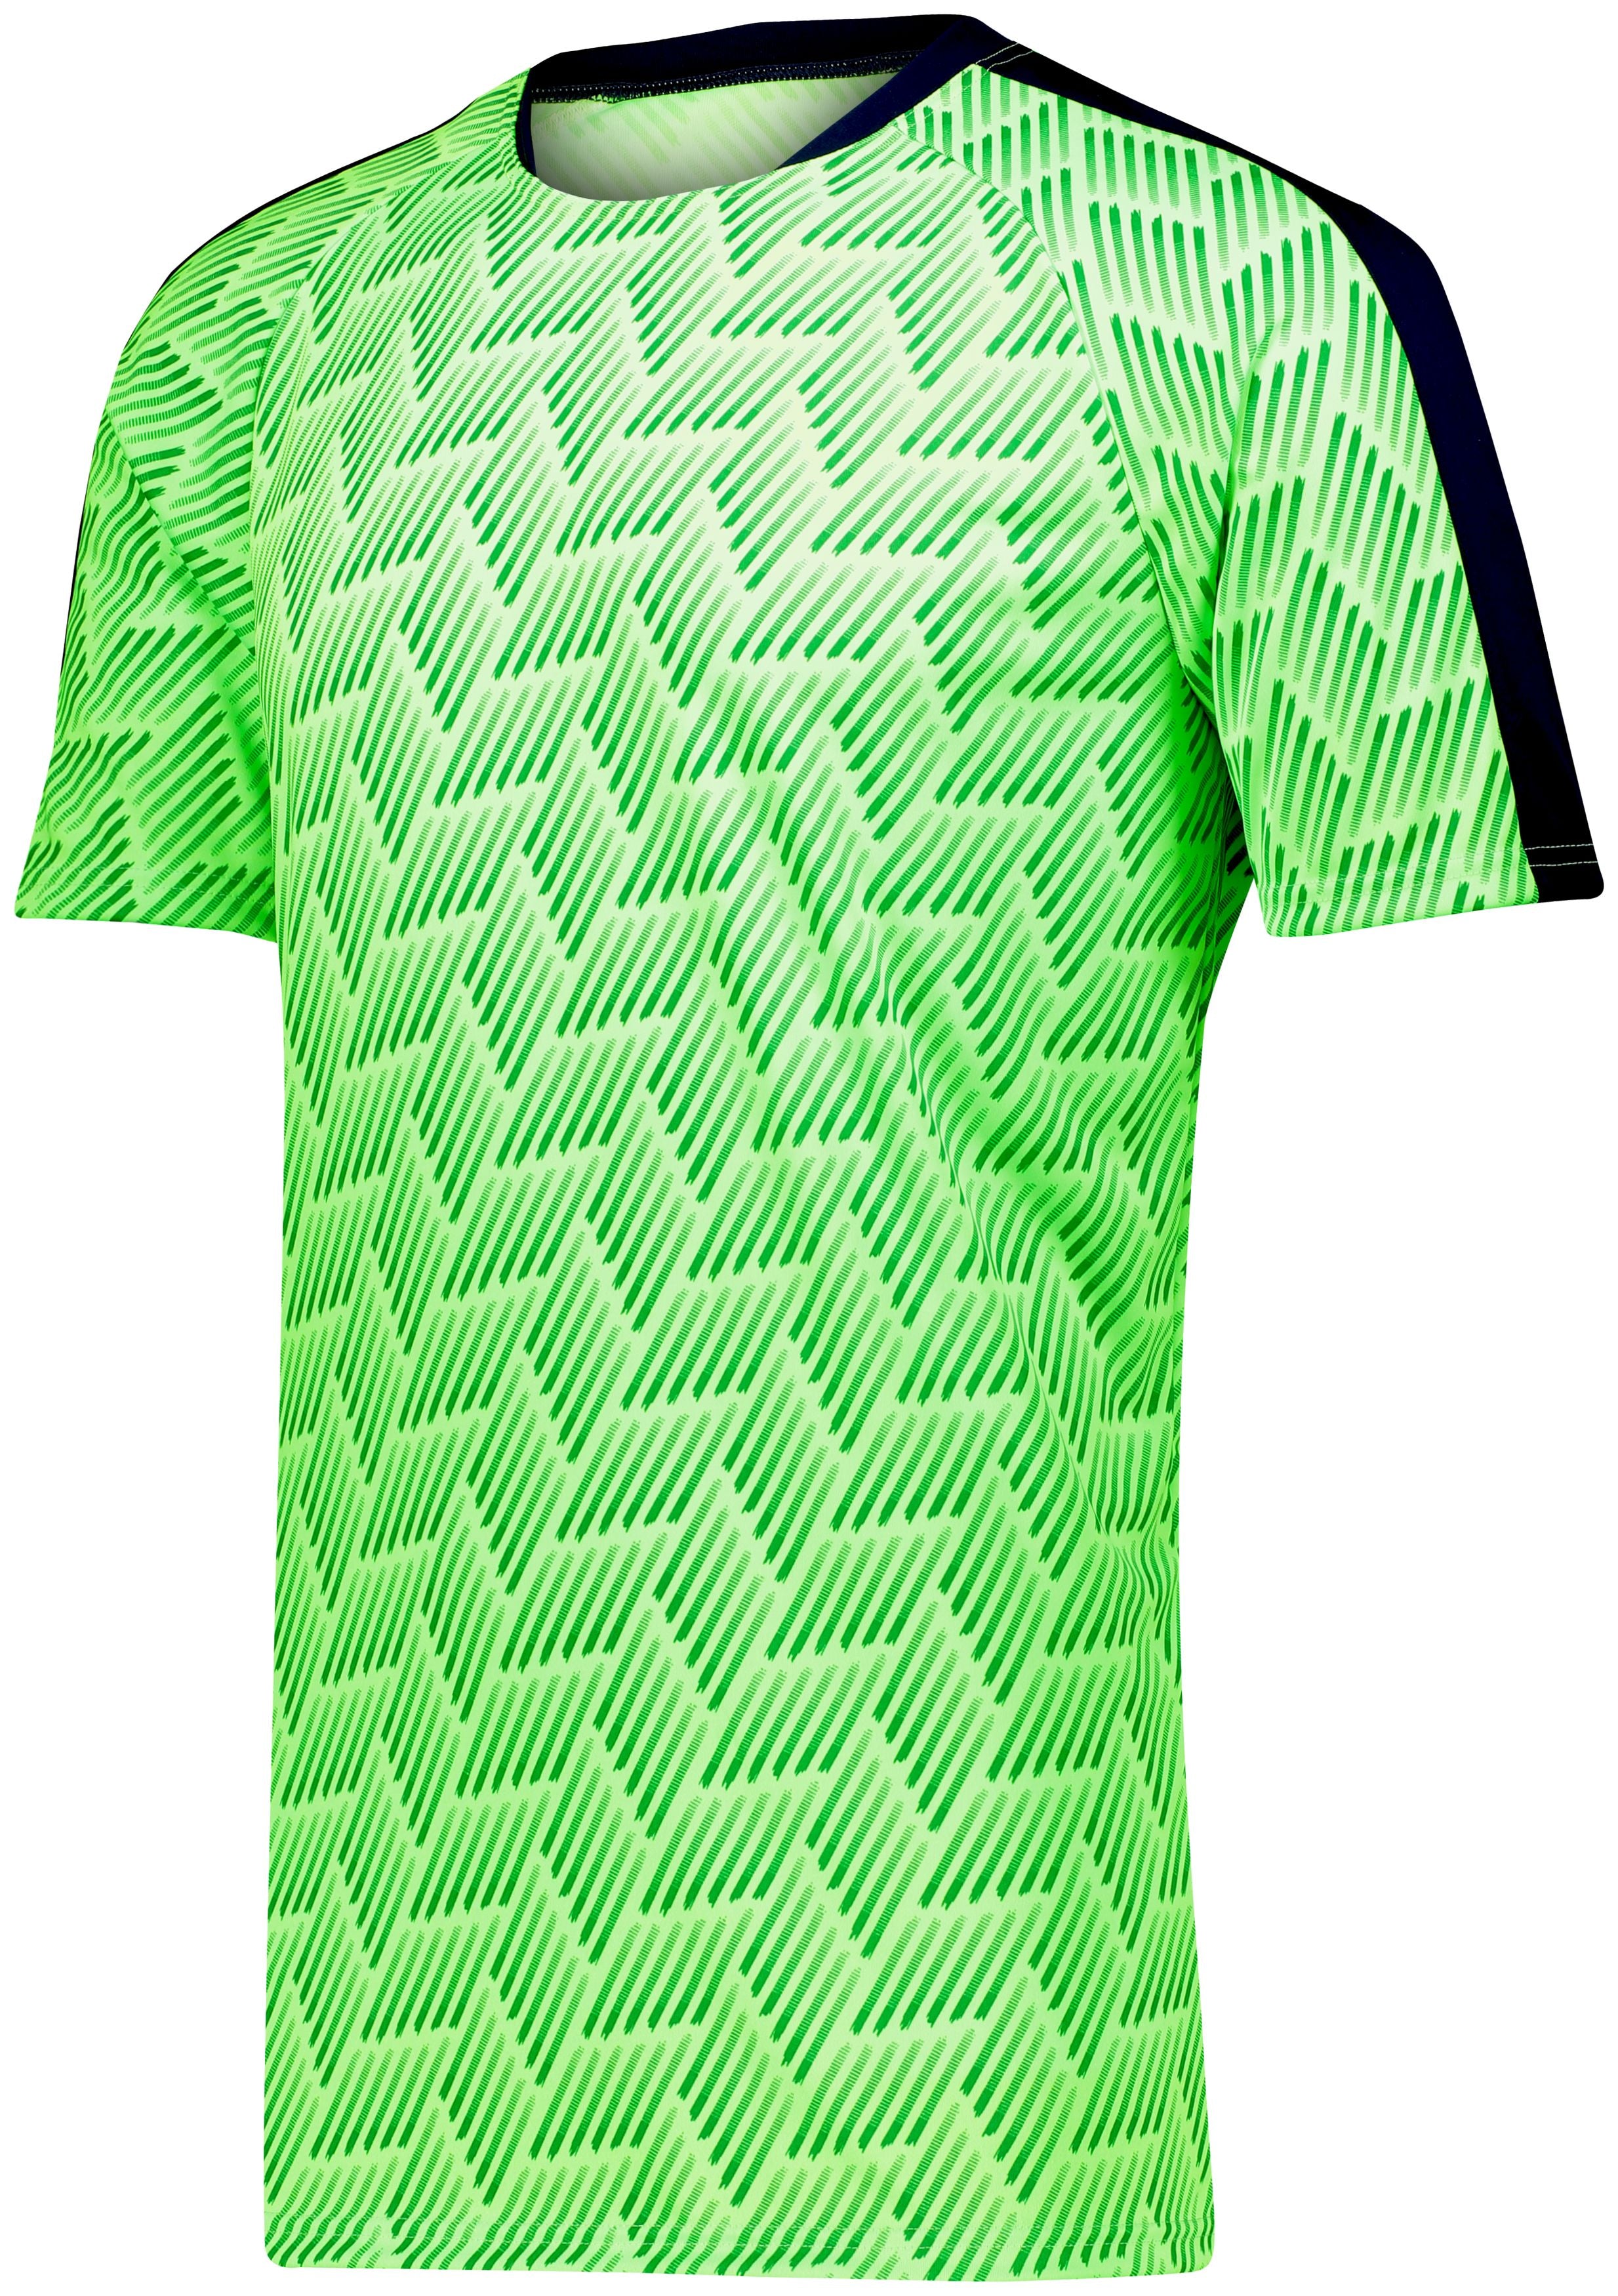 High 5 Hypervolt Jersey in Lime Print/Navy  -Part of the Adult, Adult-Jersey, High5-Products, Soccer, Shirts, All-Sports-1 product lines at KanaleyCreations.com